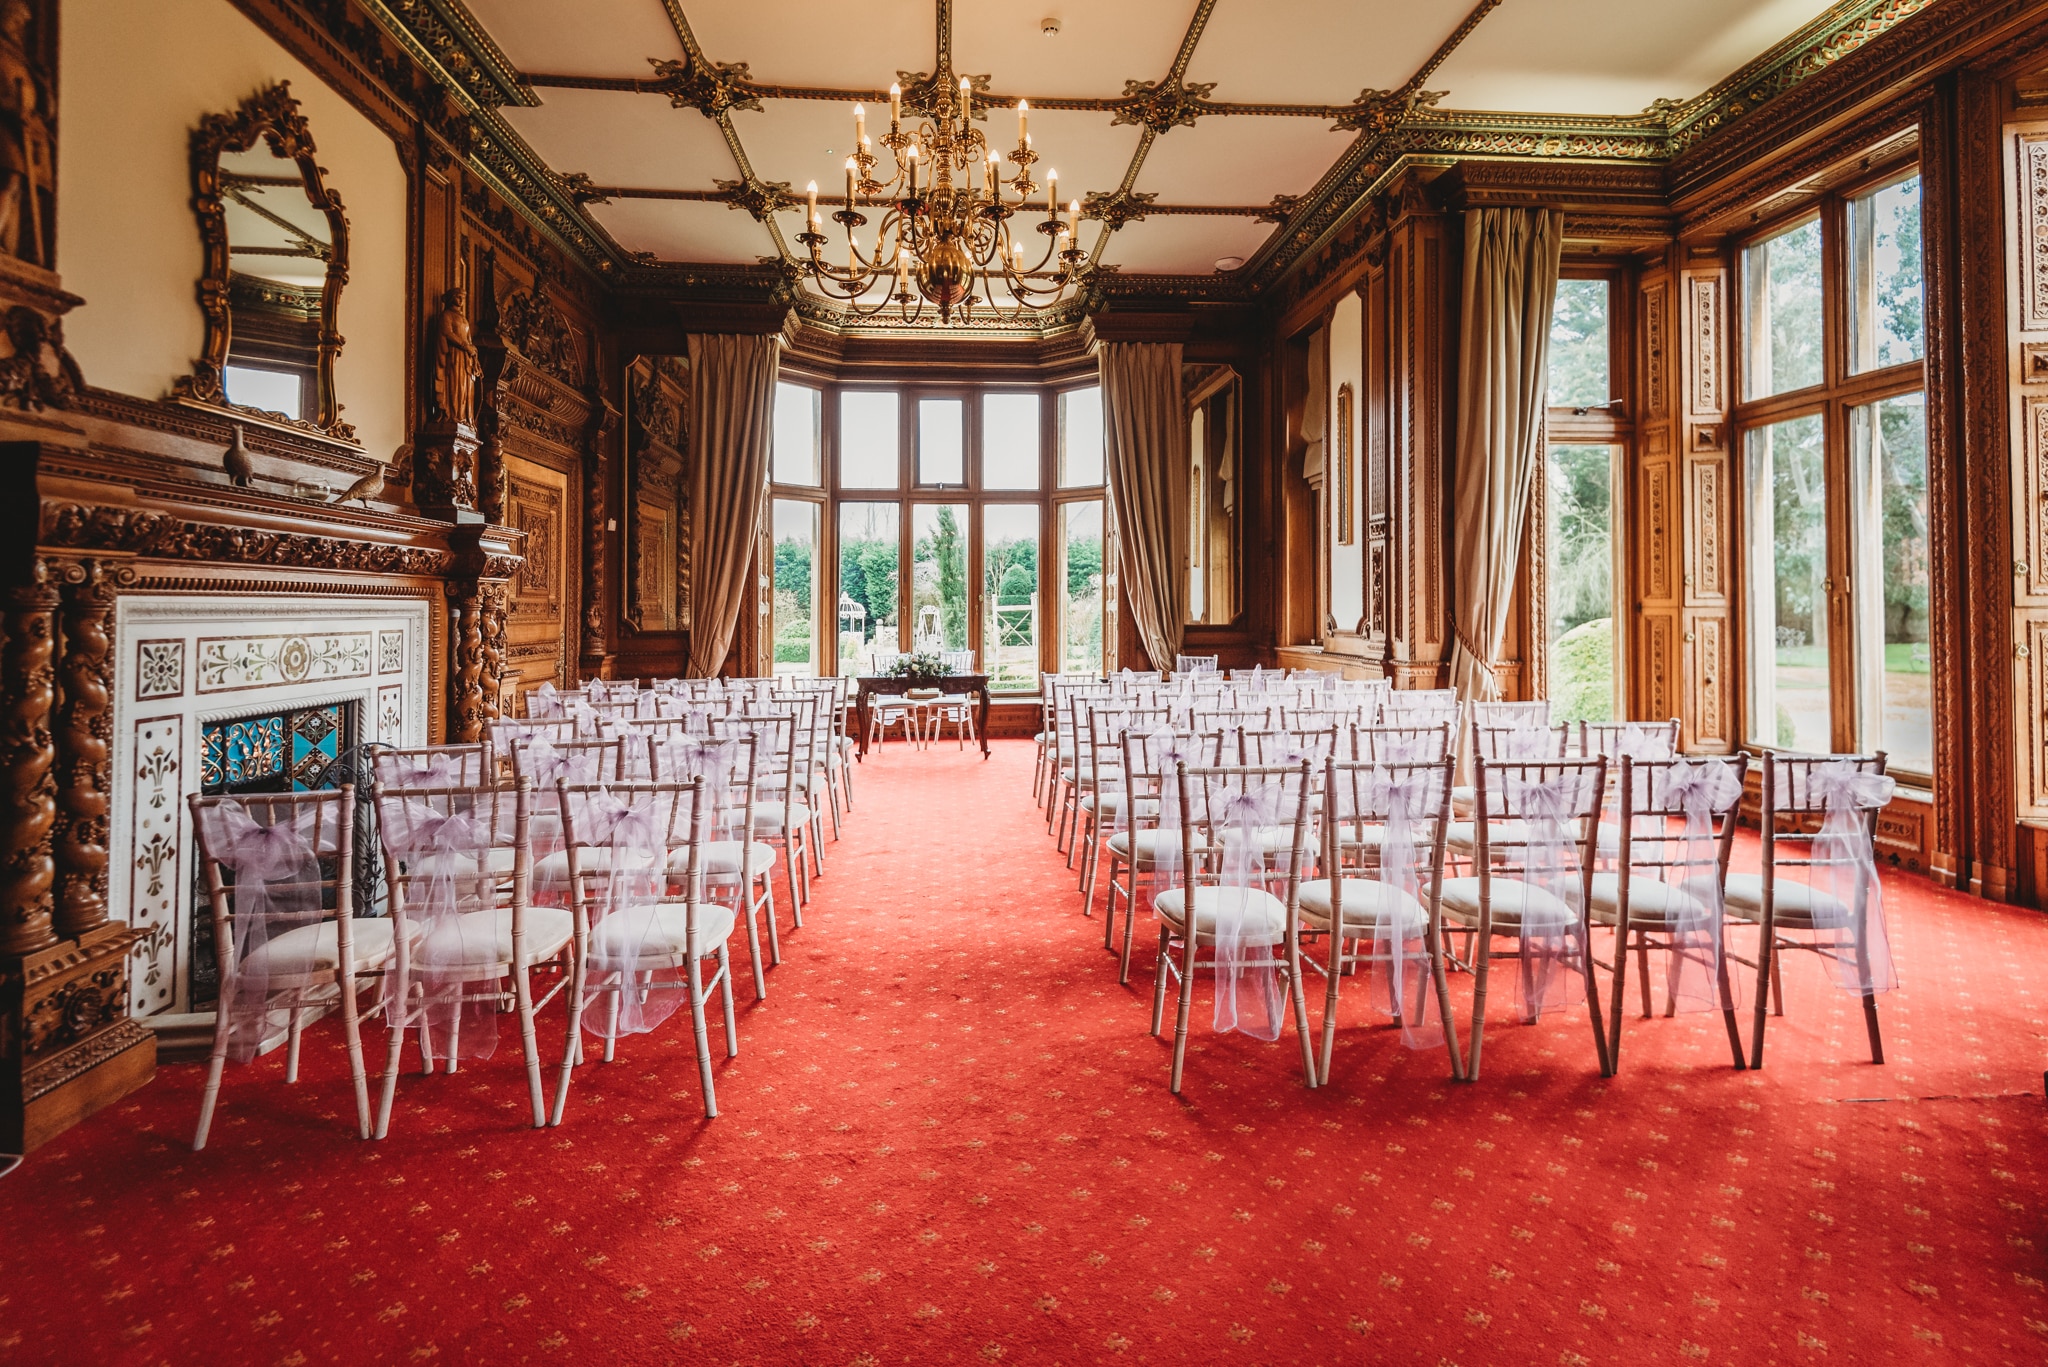 Maximillian wedding ceremony room with red carpet, dark wood and chandelier